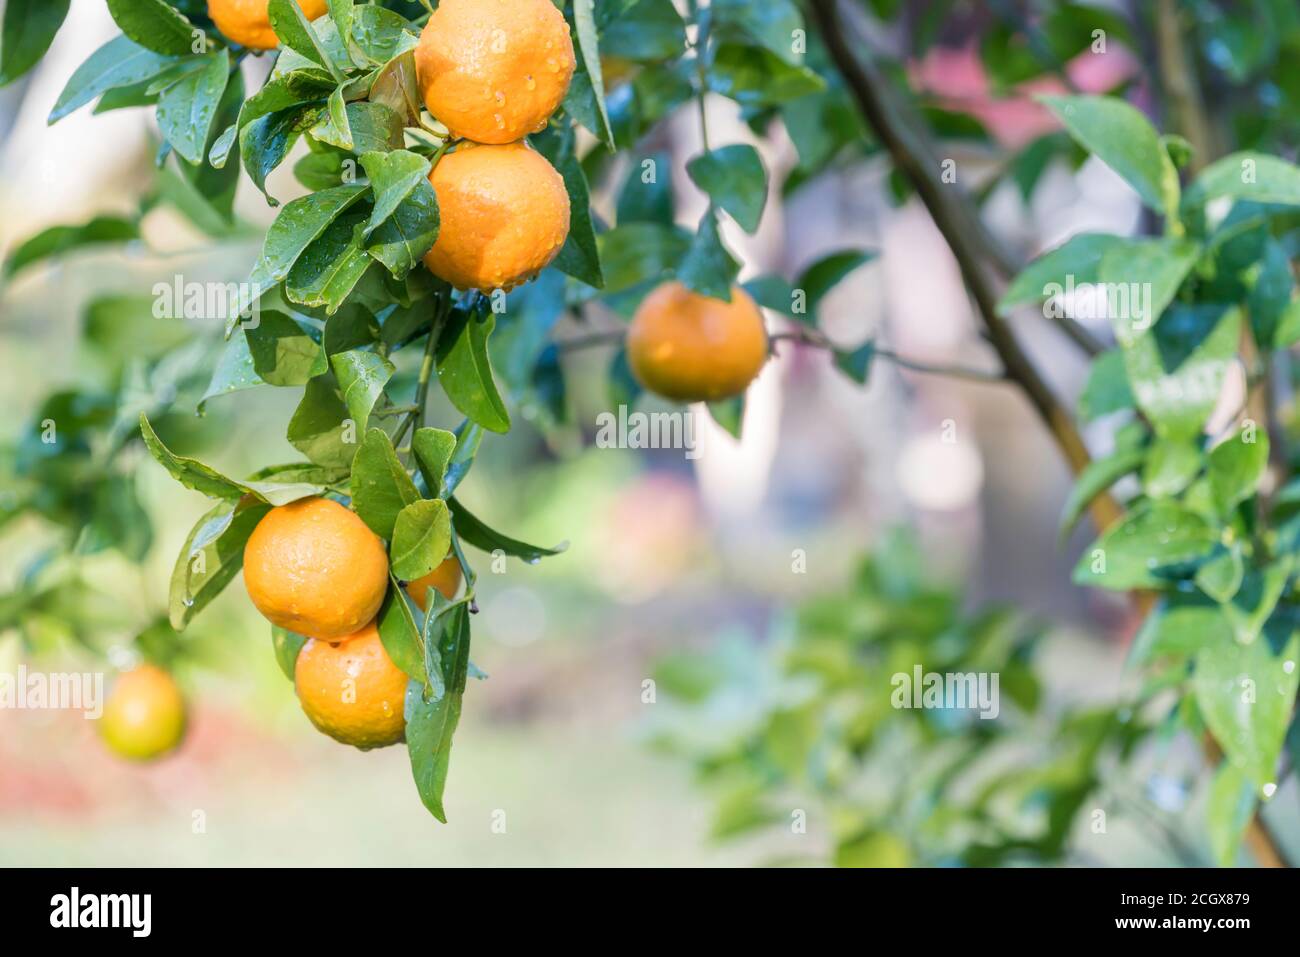 After a morning winter shower water droplets cling in the sunlight to juicy ripe mandarins (Citrus reticulata) on a backyard citrus tree in Sydney Stock Photo